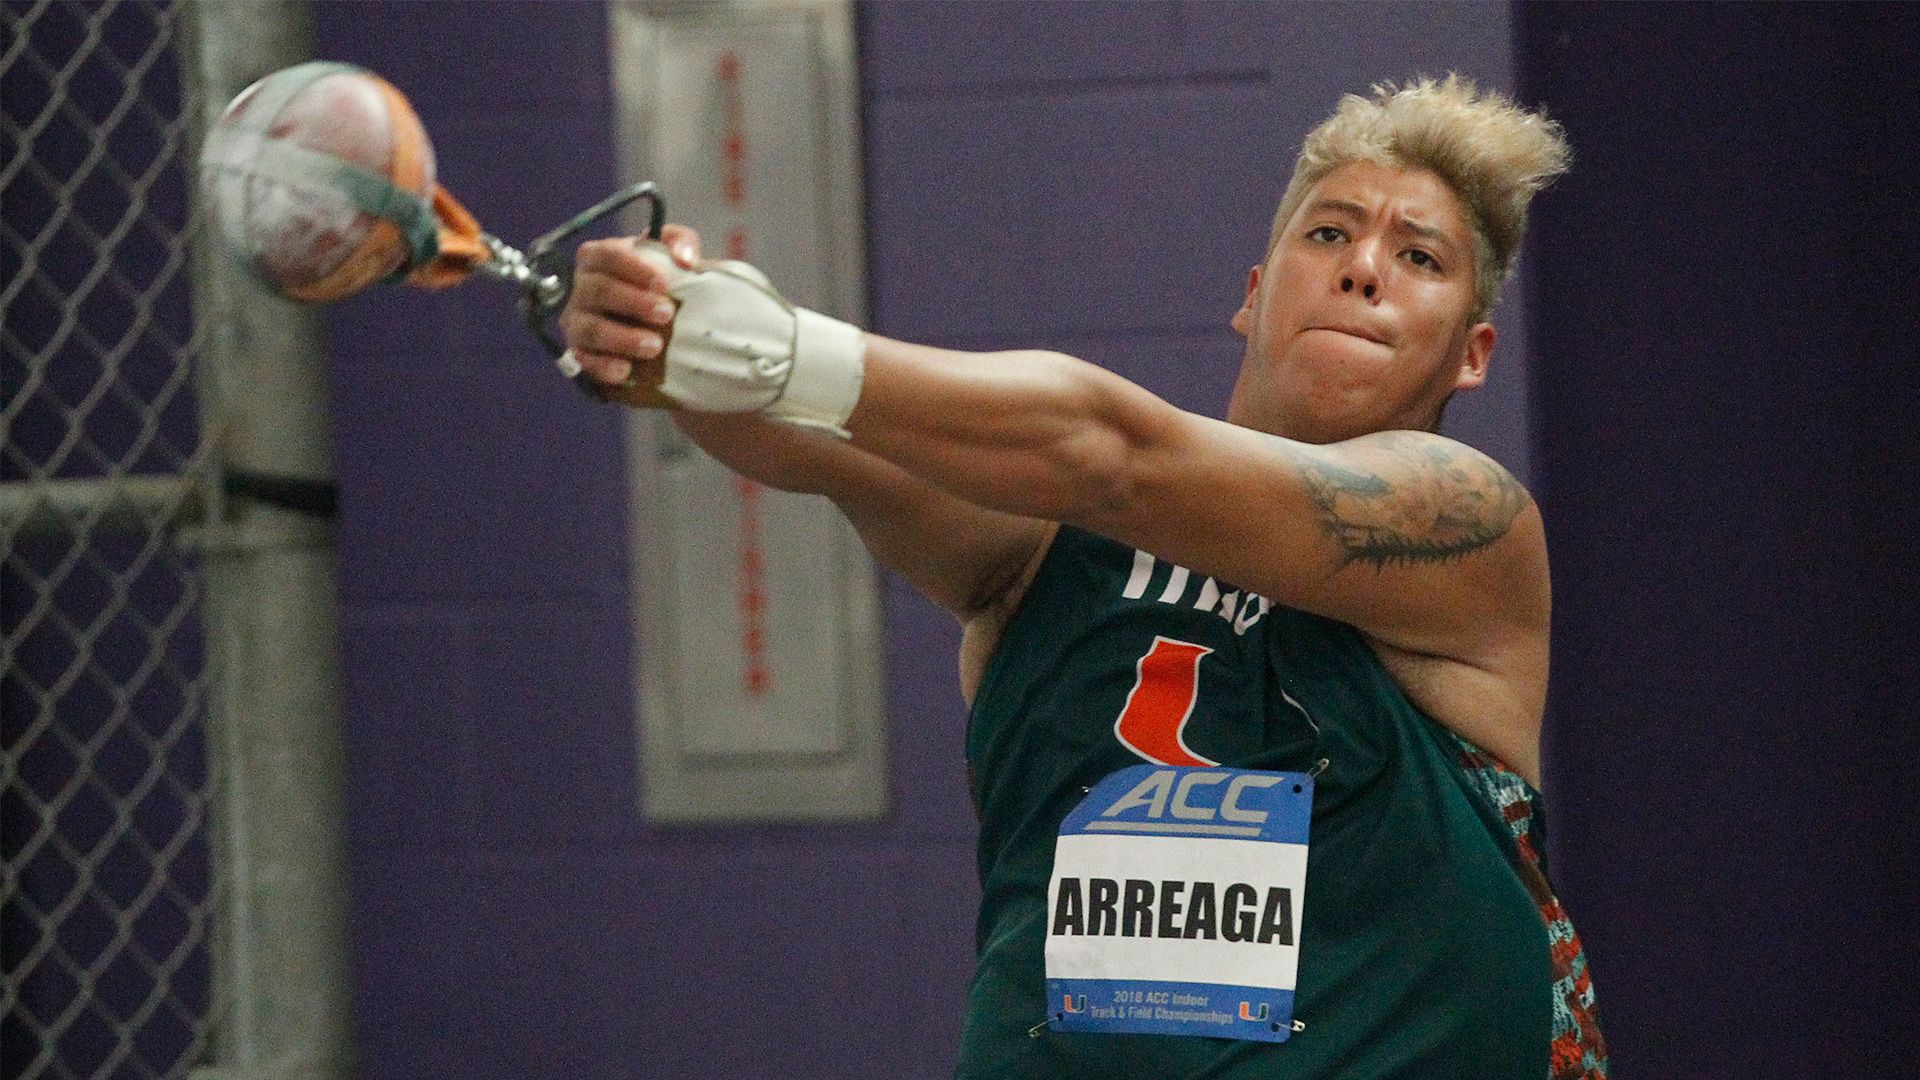 Canes Shine in Field Events on Day 2 at #ACCITF Championships